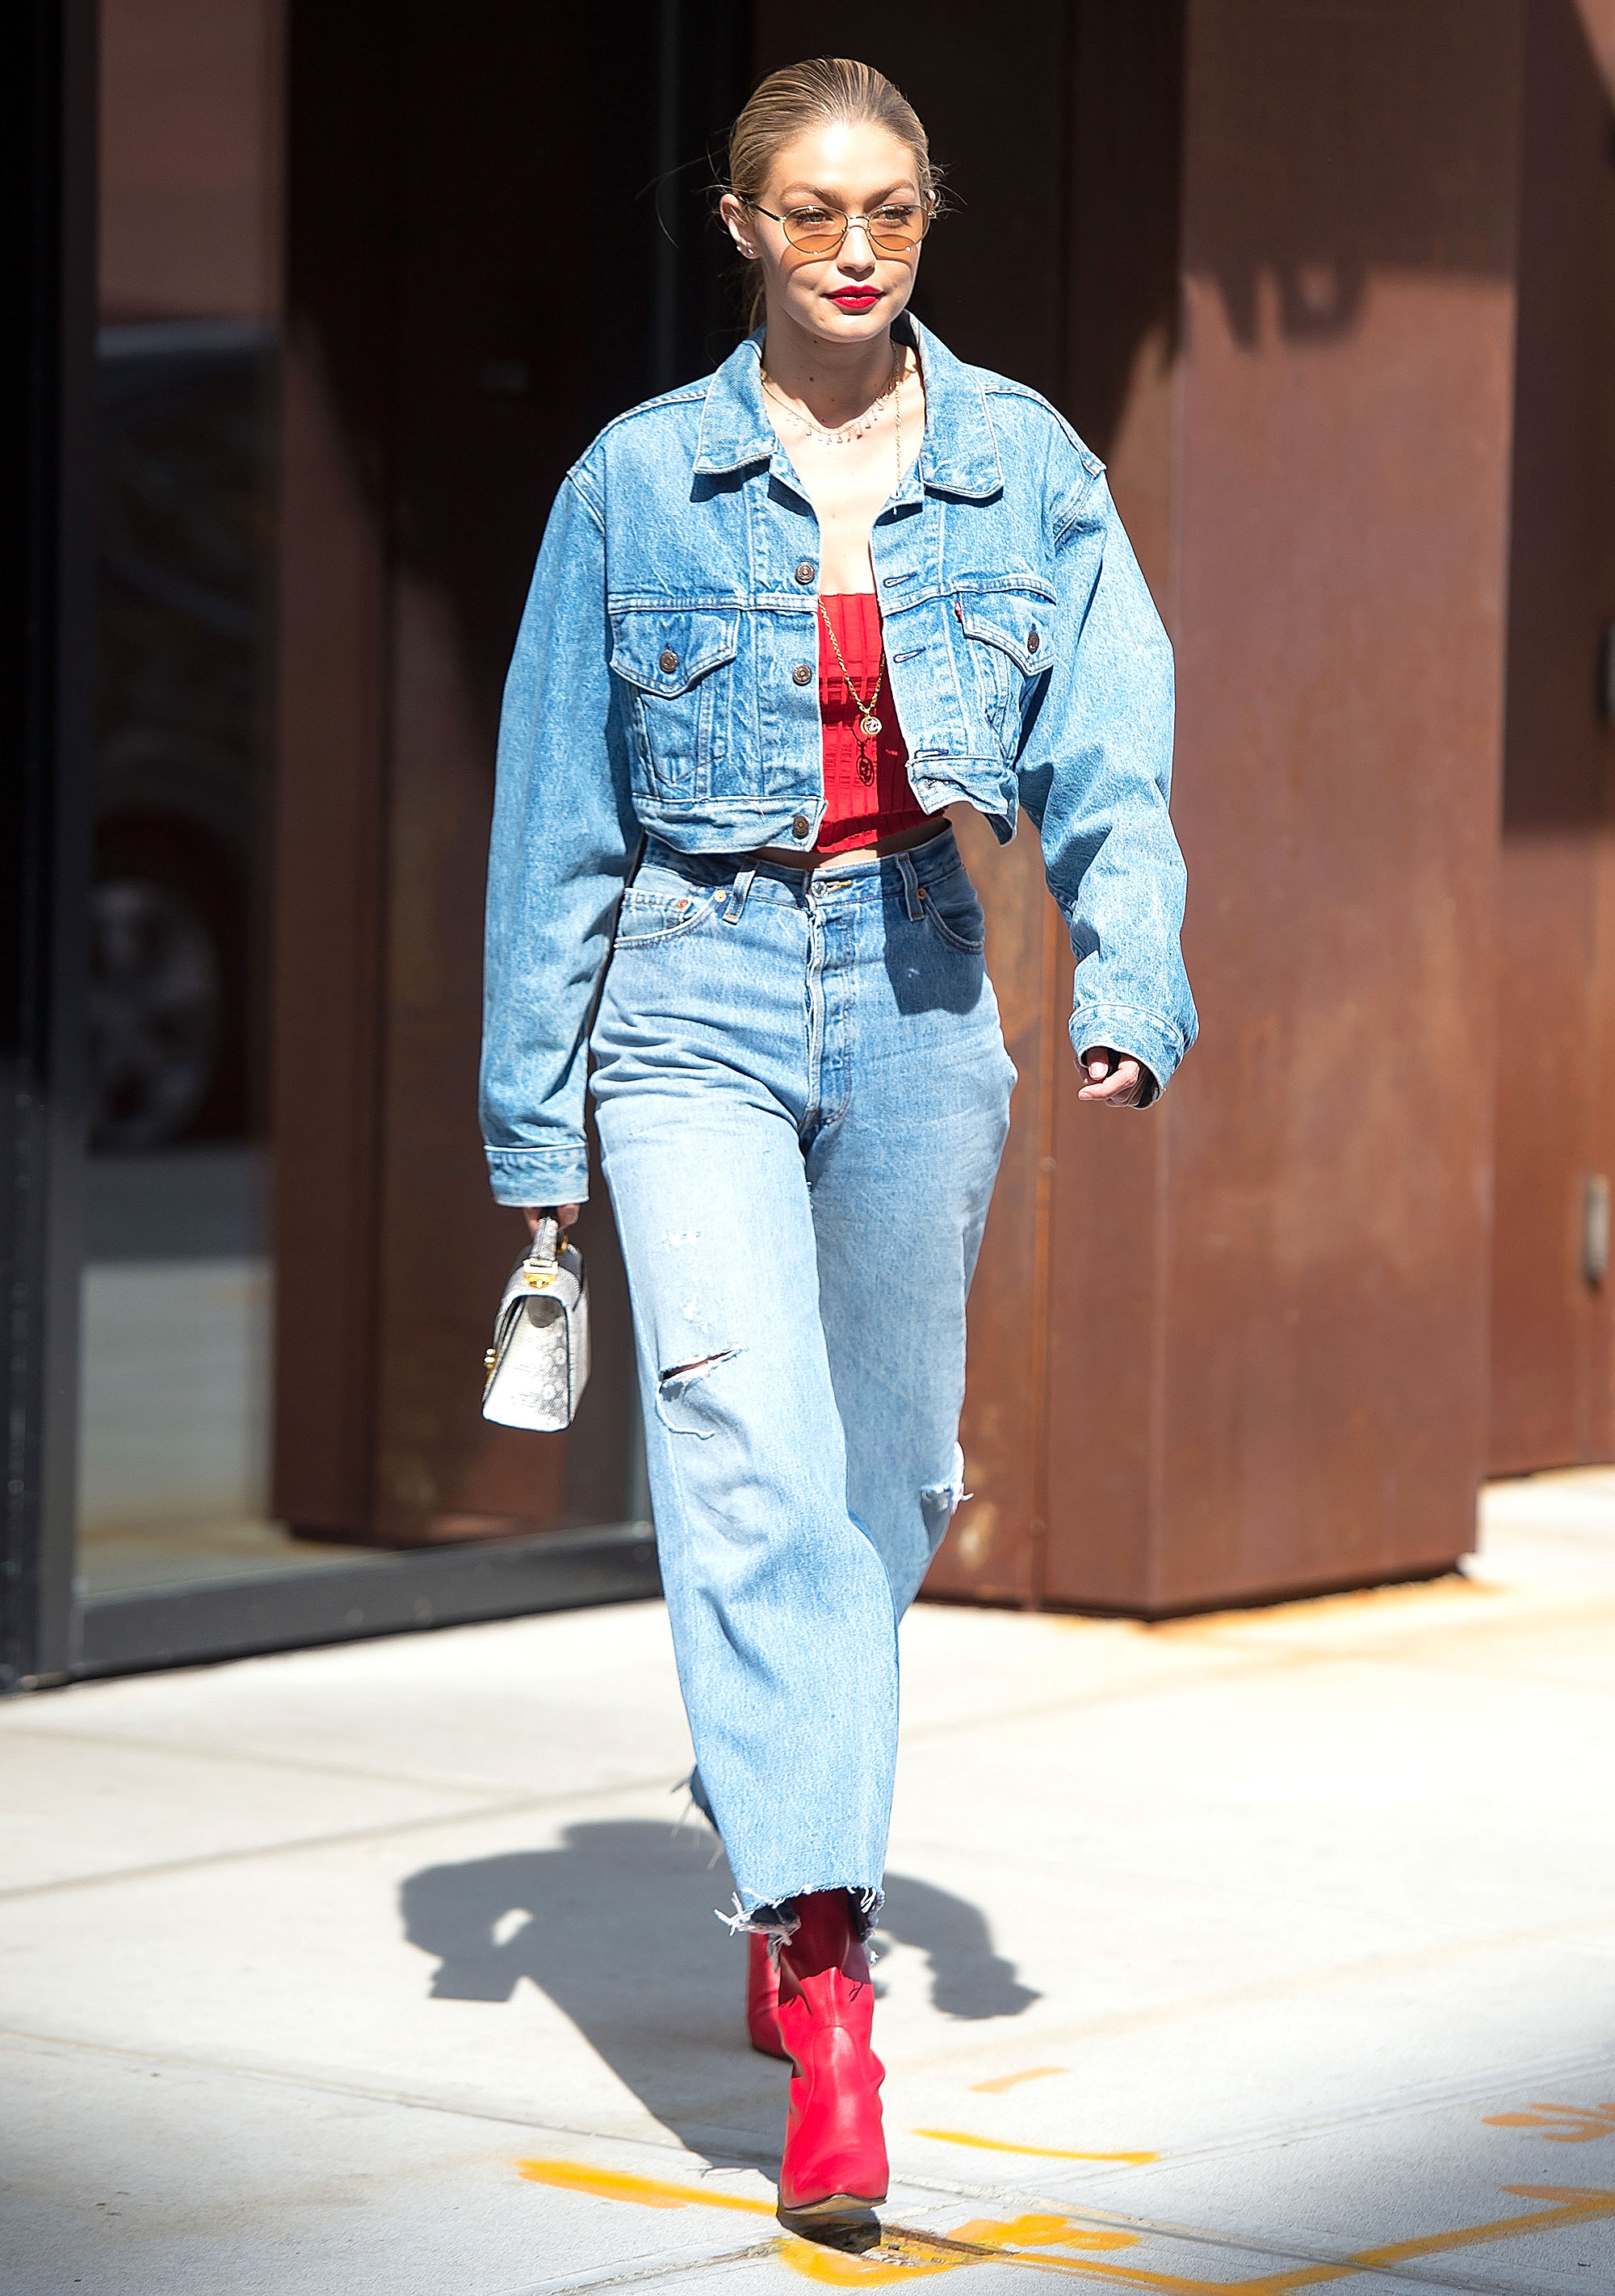 Double Denim Totally Tres Chic Or Fashion Faux Pas  Capital